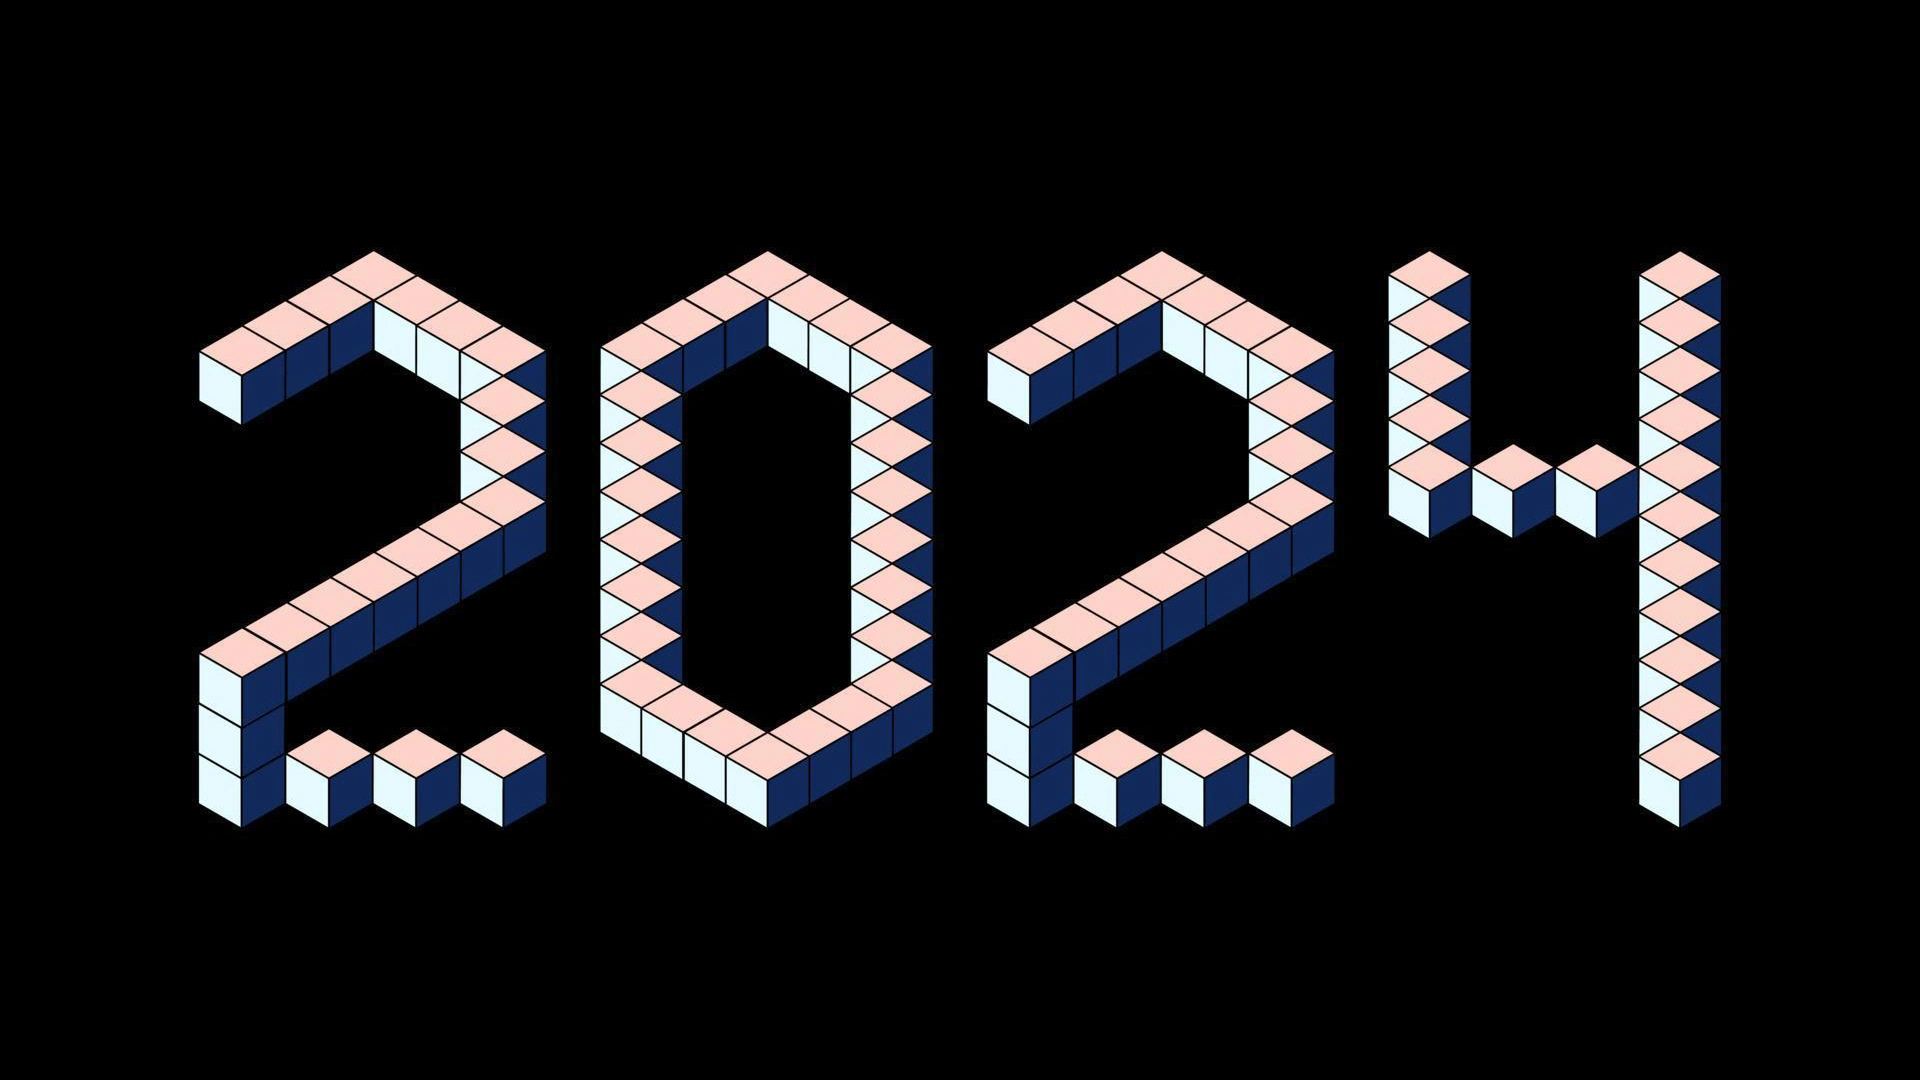 New Year 2024 Design From Pastel Cubes On Black 8 Bit Isometric Style Vector